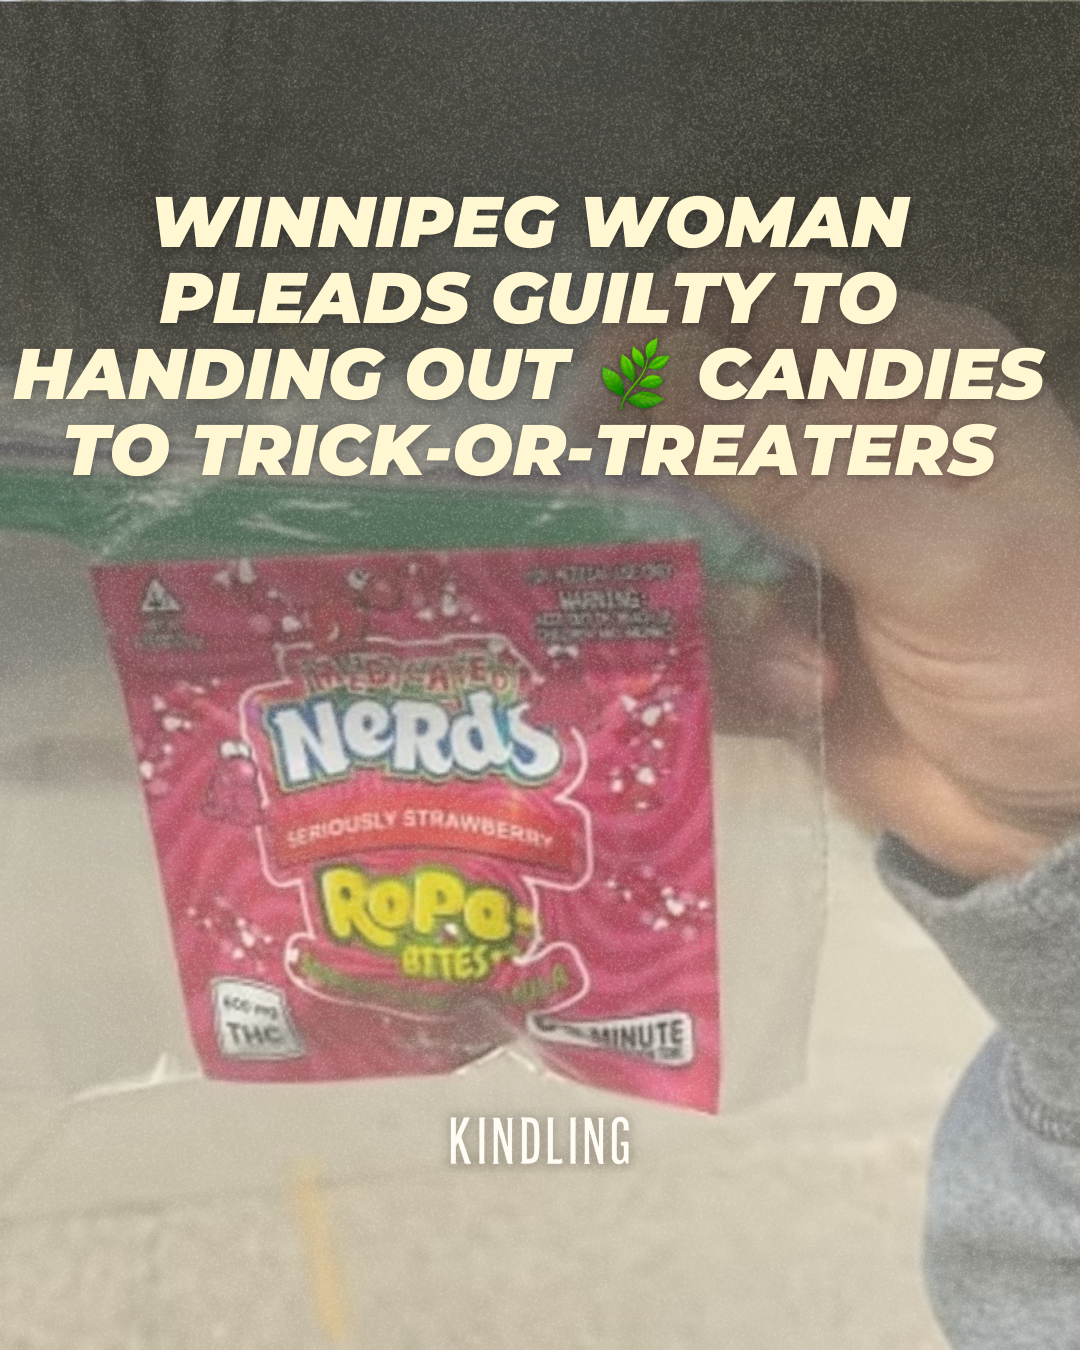 WOMAN PLEADS GUILTY TO HANDING OUT CANNABIS CANDIES TO TRICK-OR-TREATERS